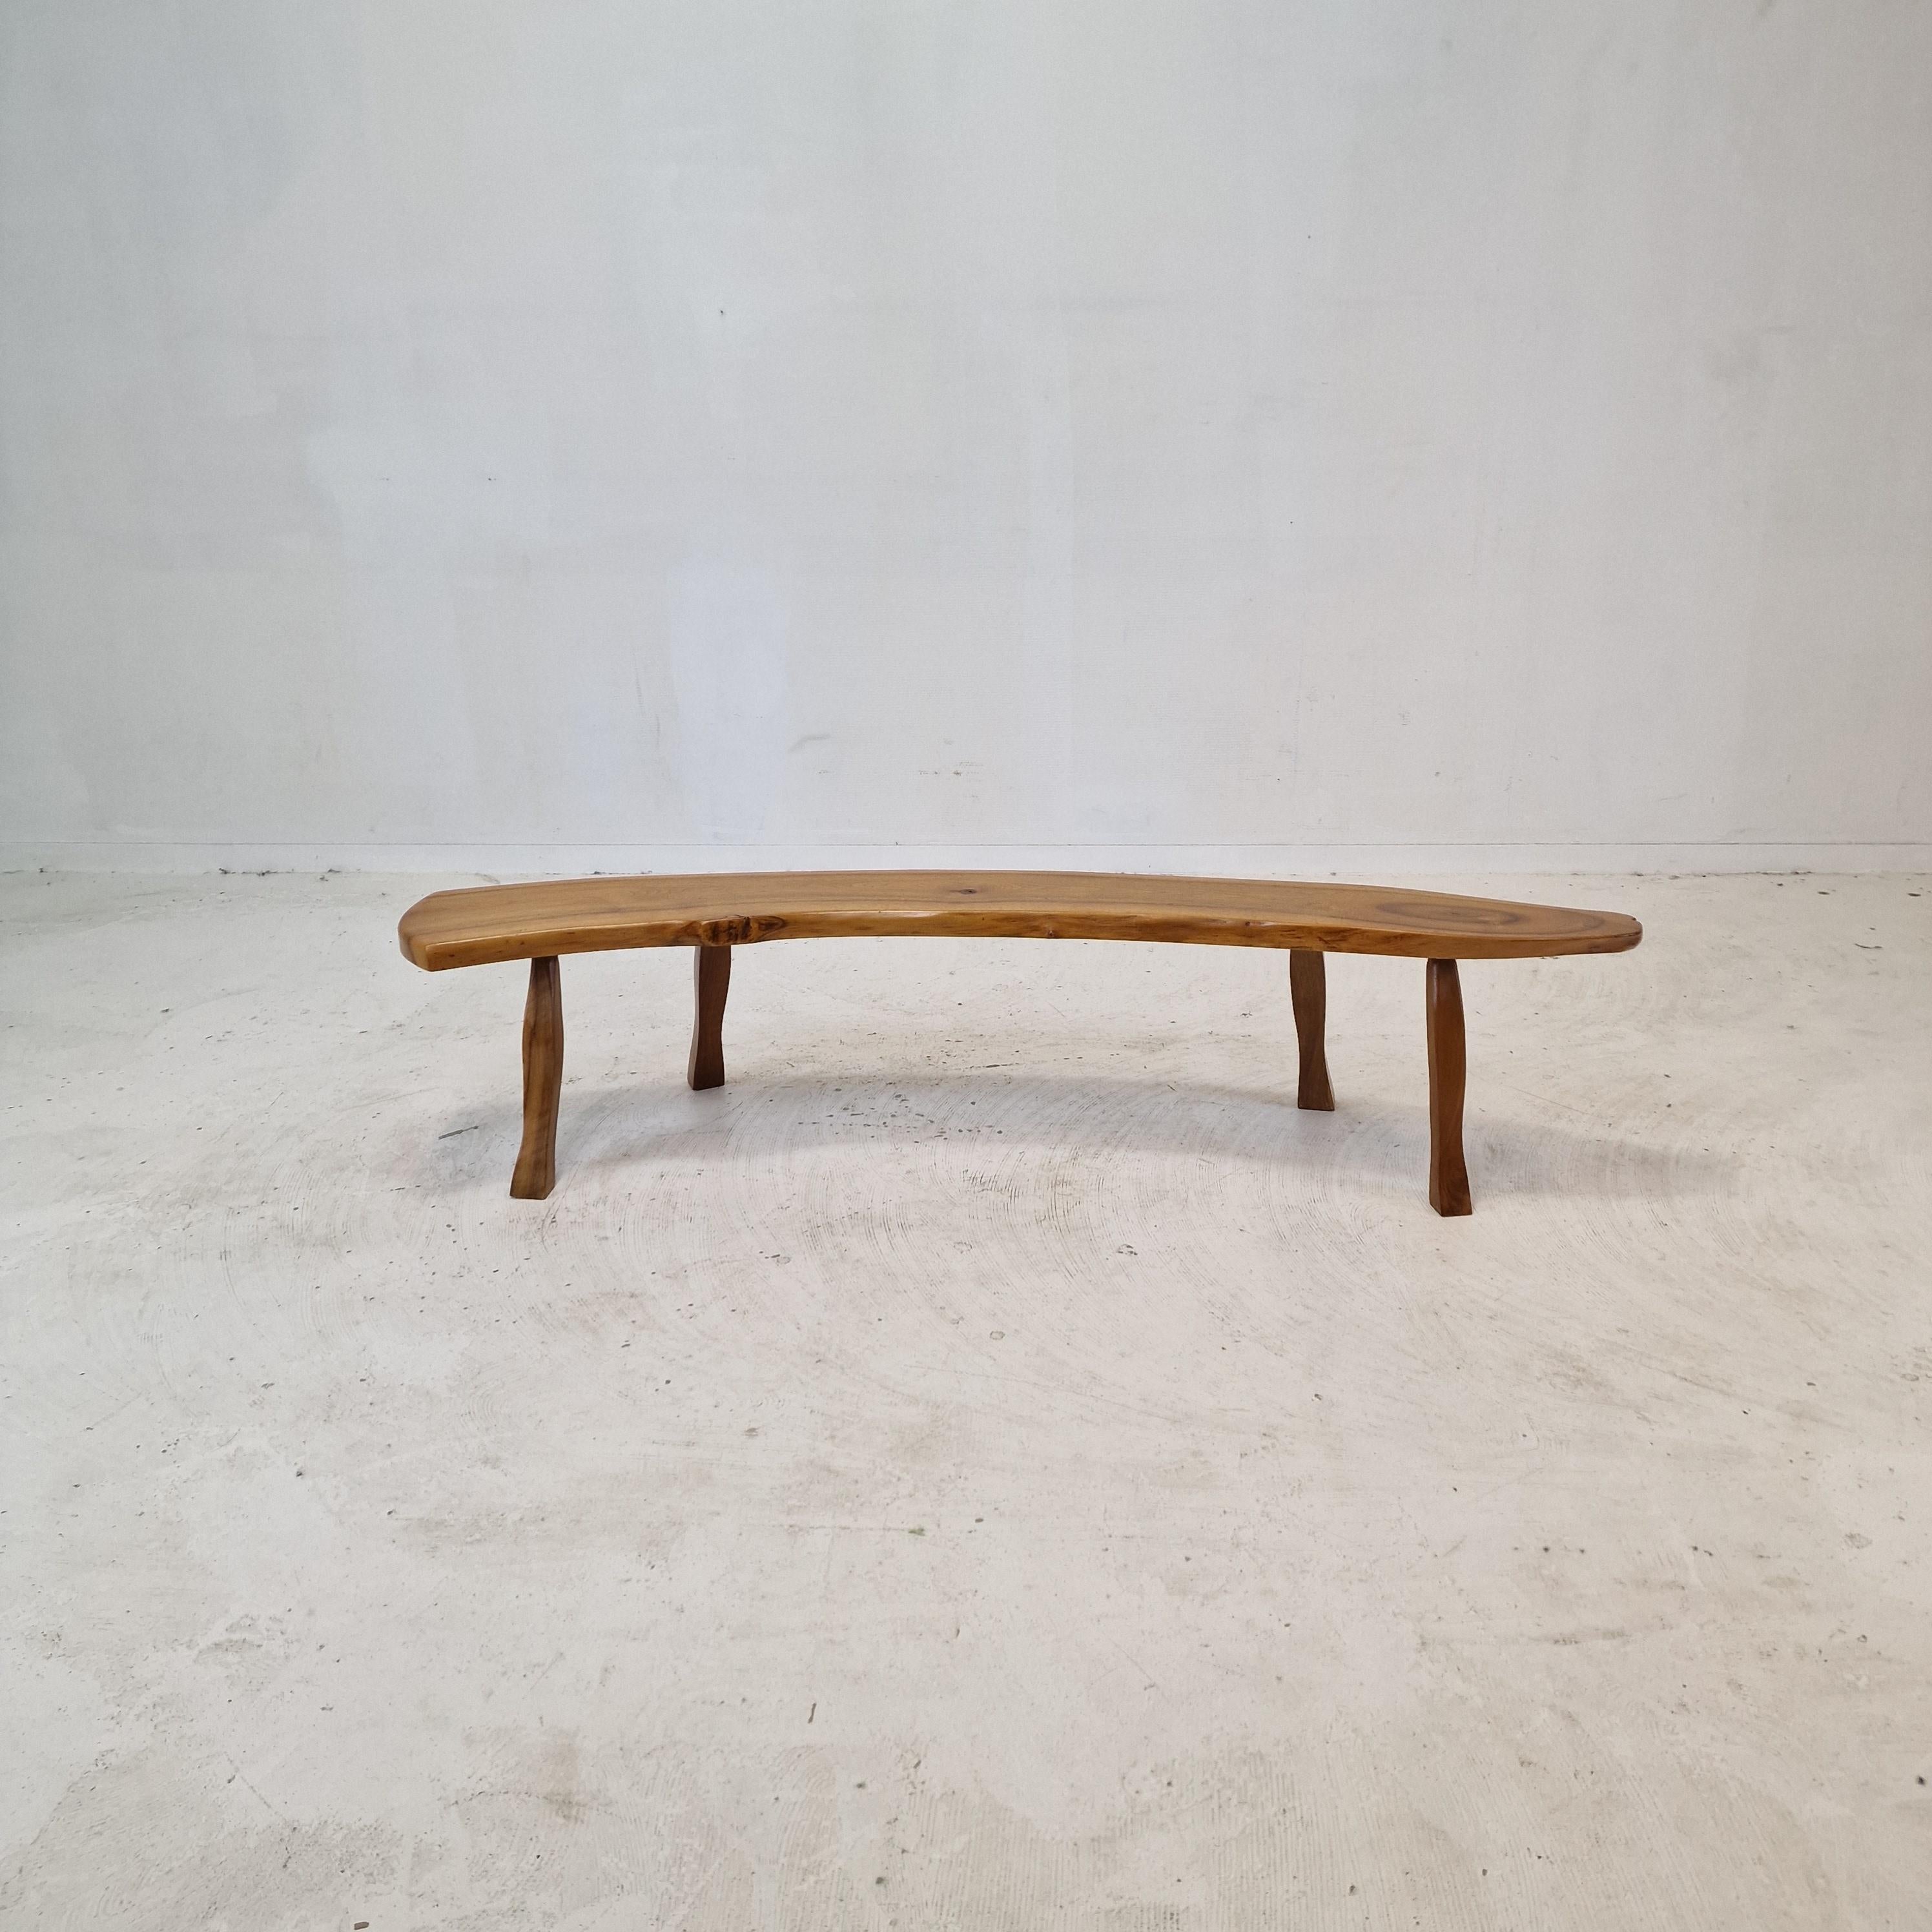 A beautiful tree trunk bench or coffee table in organic form with beautiful wood grain and smooth texture. 

It is fabricated in France in the 60's.

The tree trunk has a slight rounding what makes it very particular.

We work with professional